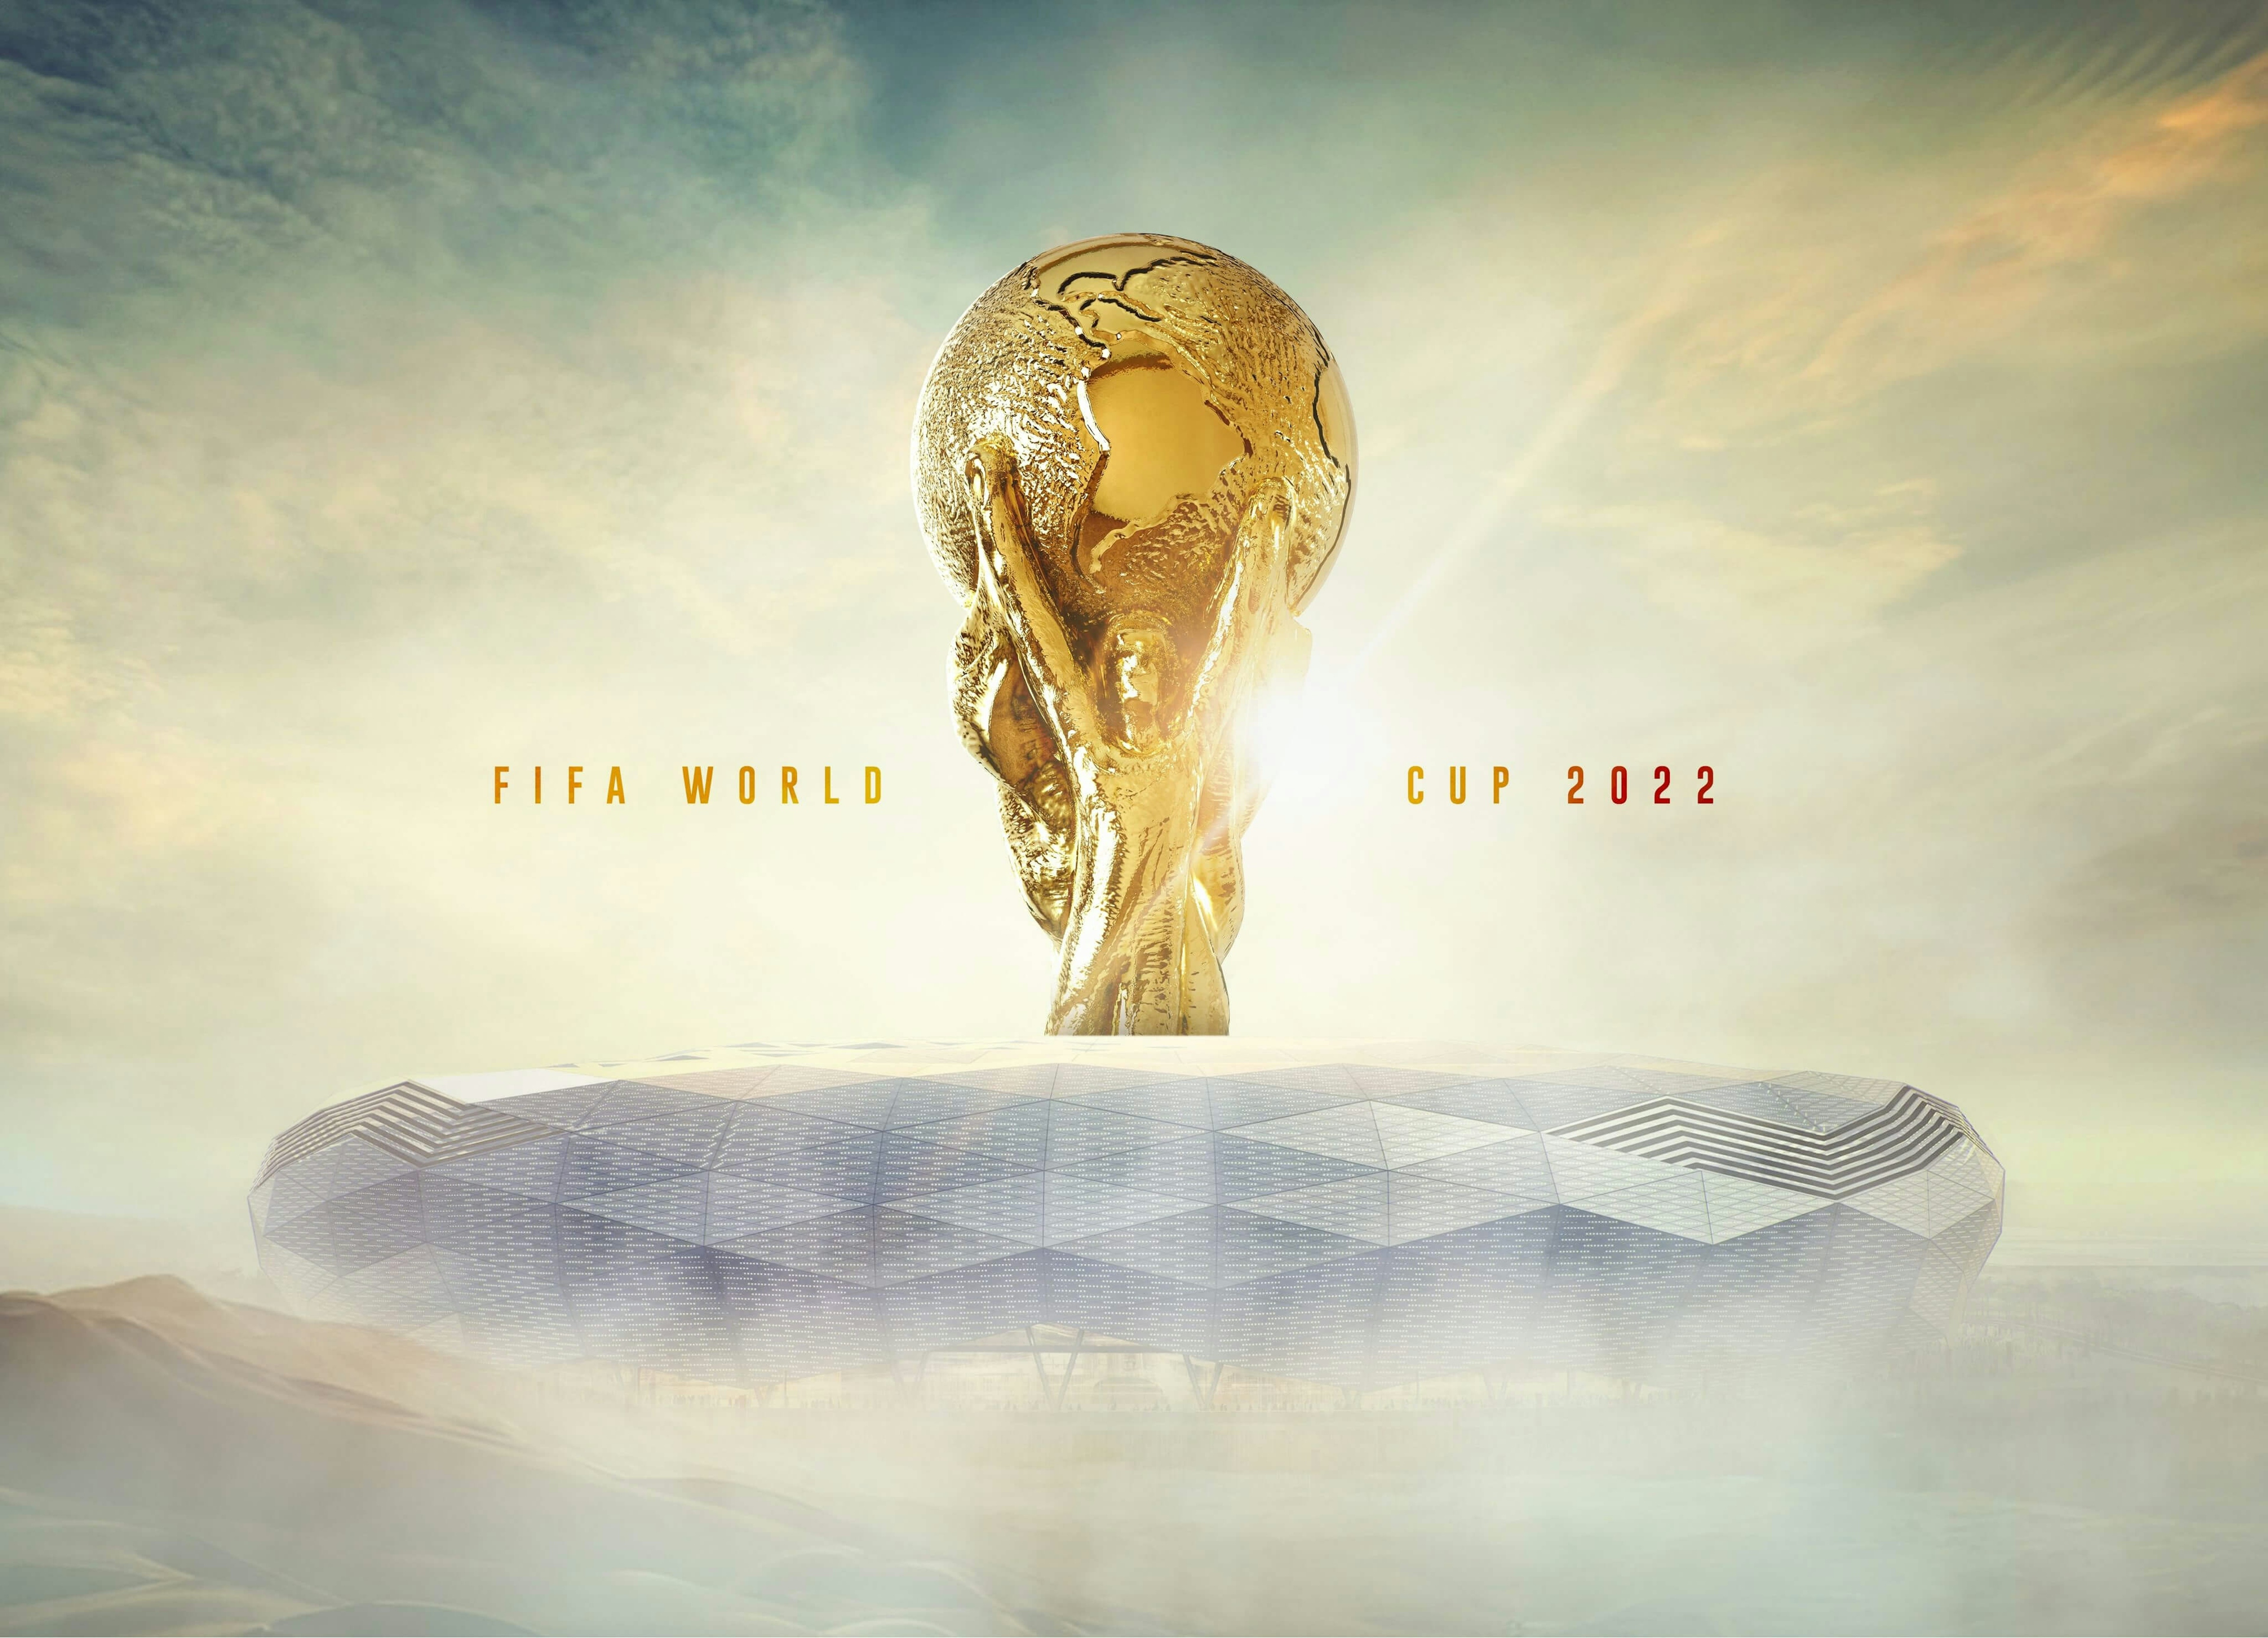 The FIFA world cup trophy, with the text "FIFA WORLD CUP 2022"